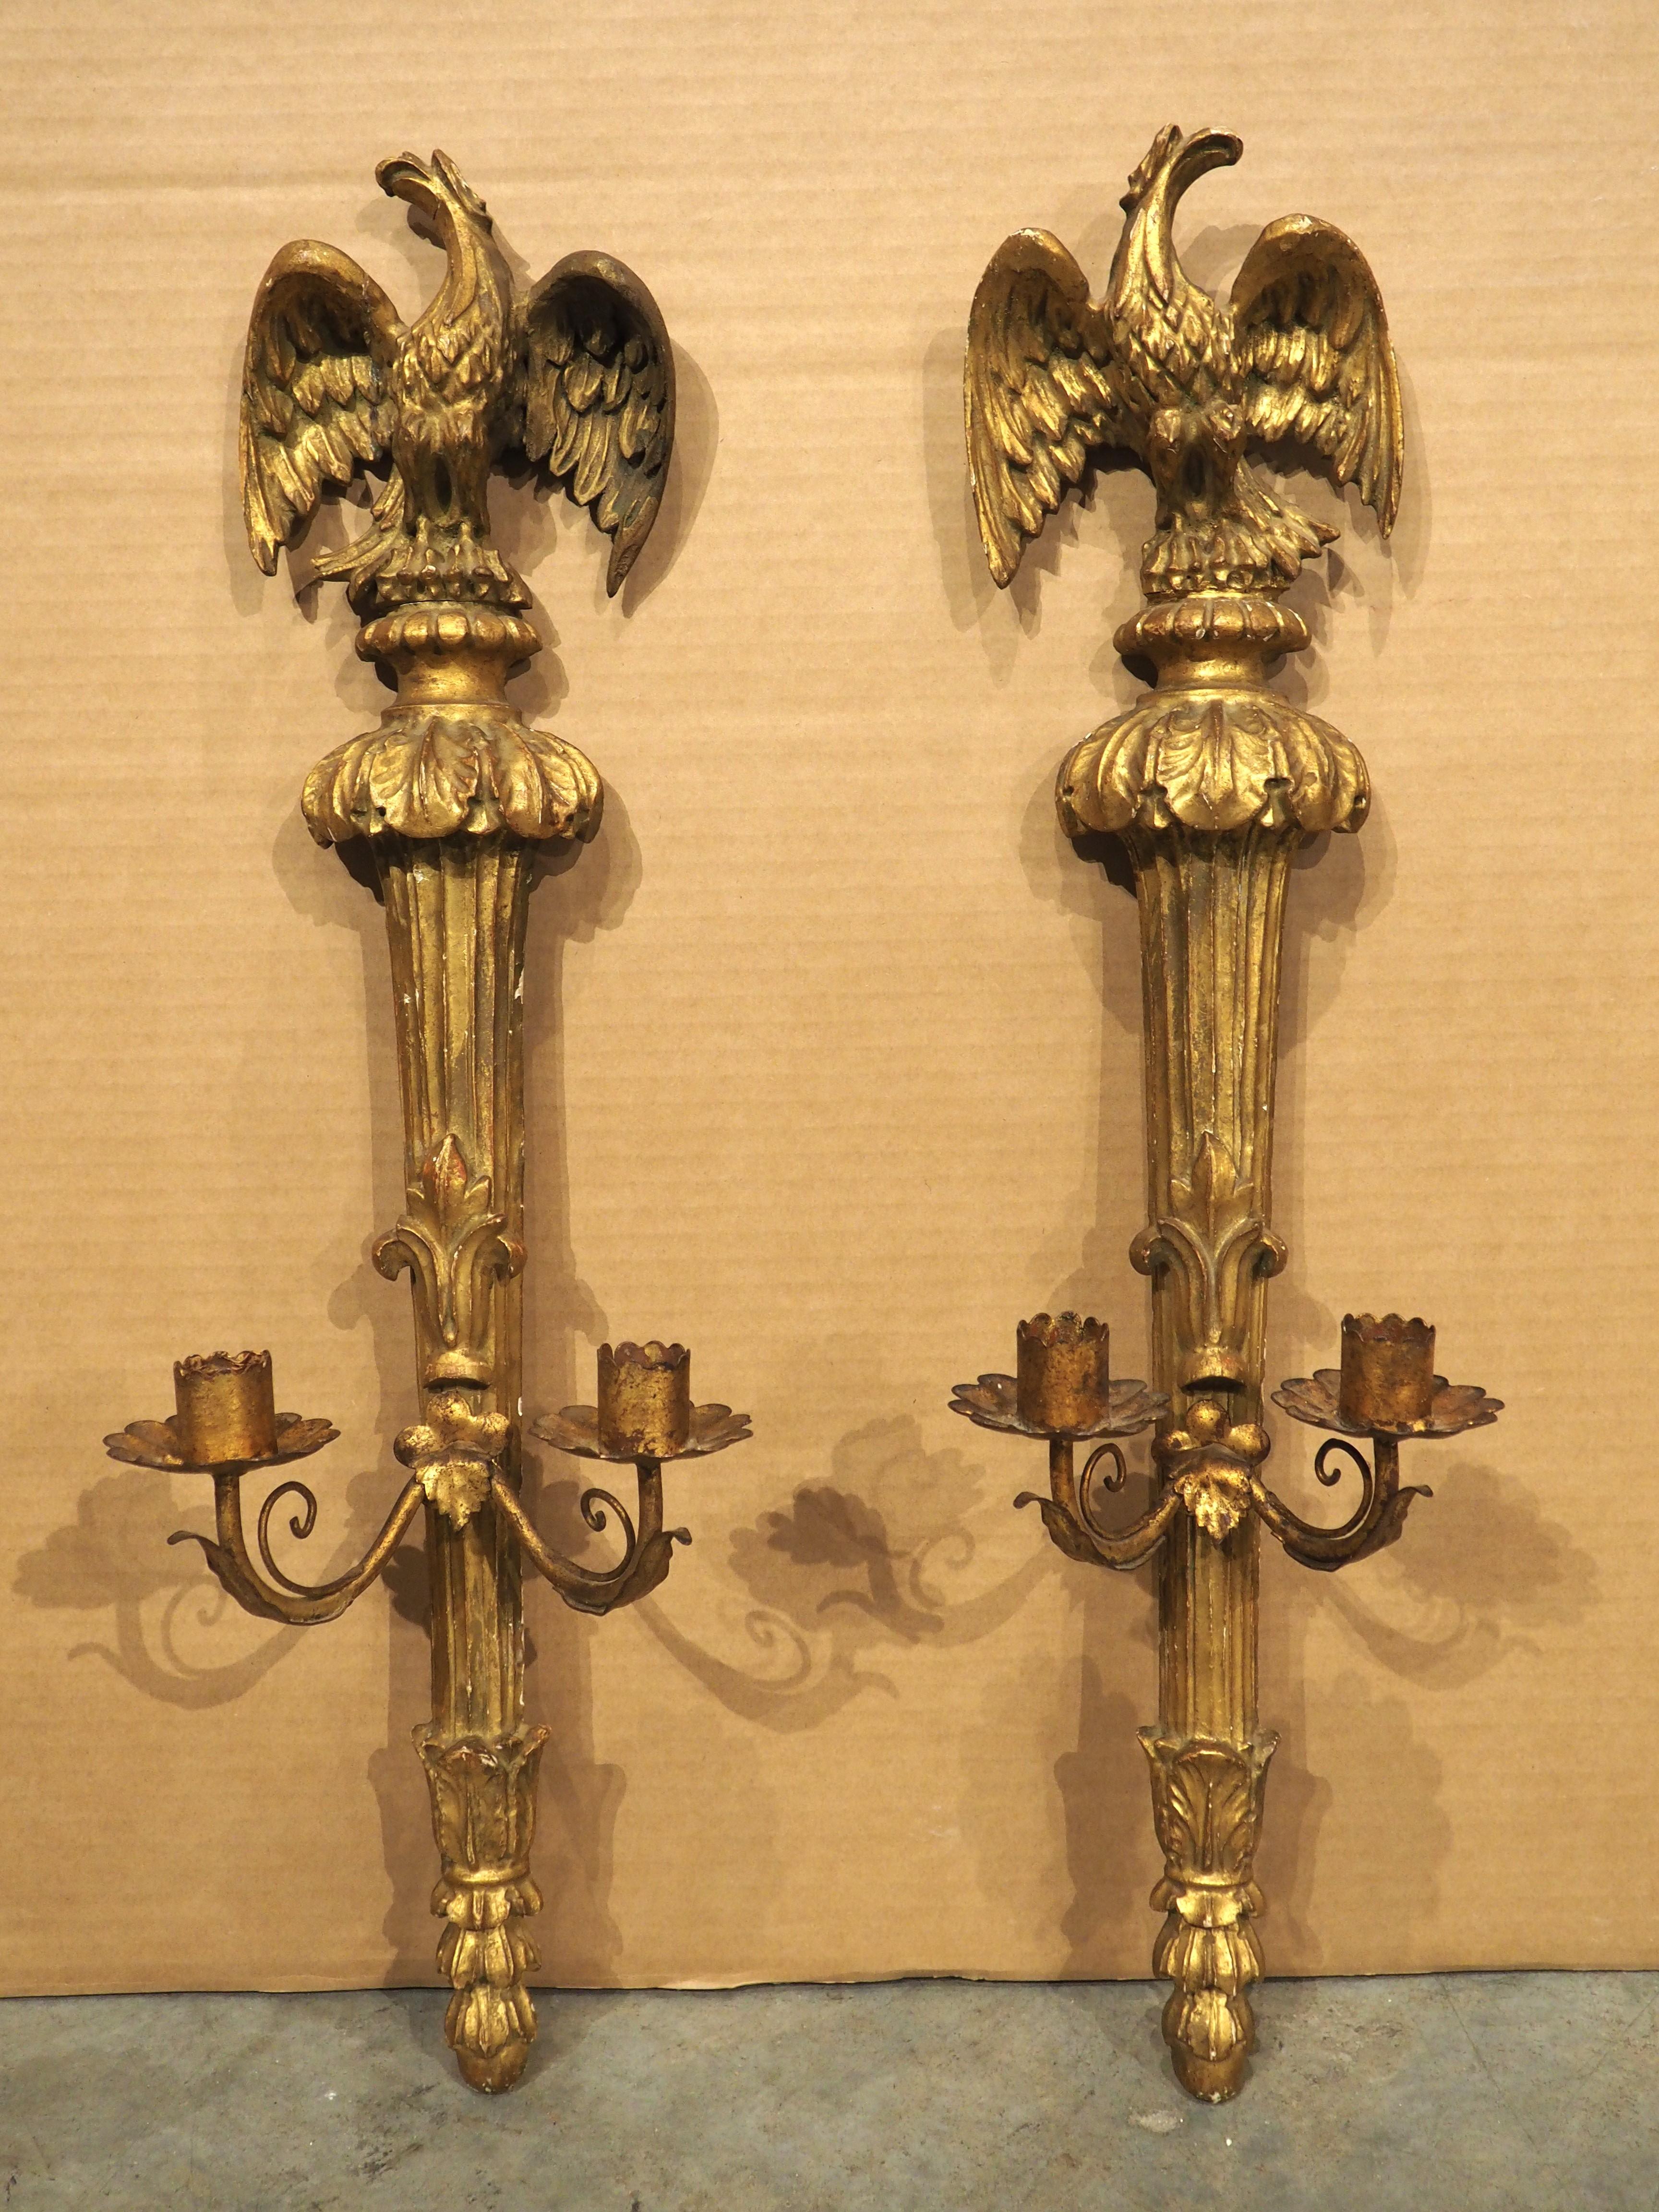 Pair of French Empire Period Giltwood Eagle Sconces, Circa 1815 For Sale 10